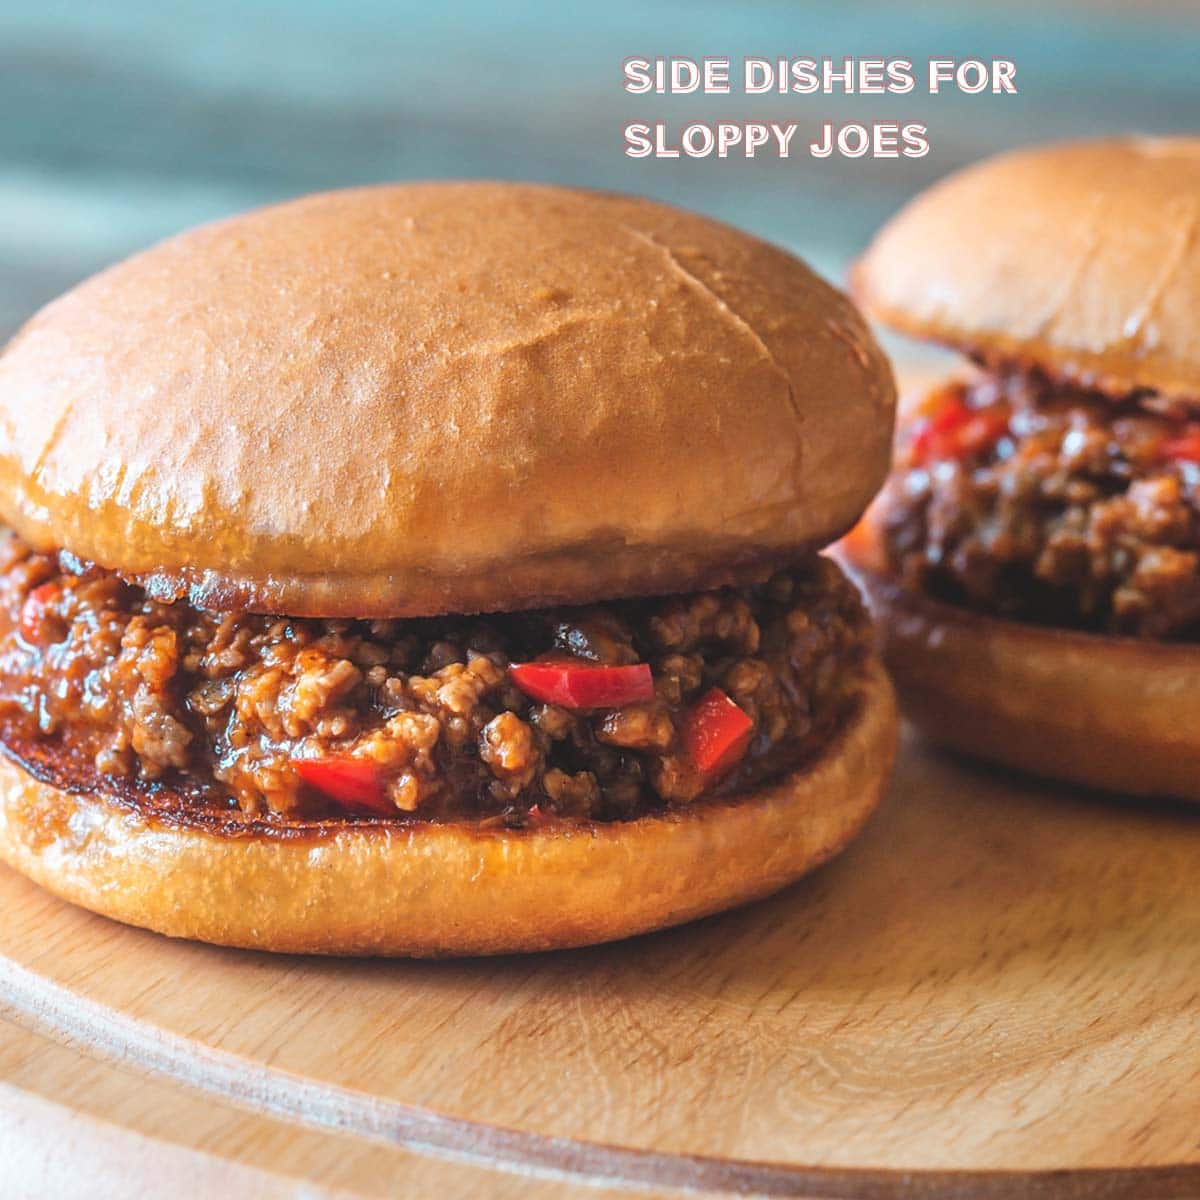 The Sloppy Joes brings to most fond memories of their school lunch breaks. Here are 15 exciting side dishes that complement sloppy joes very well.